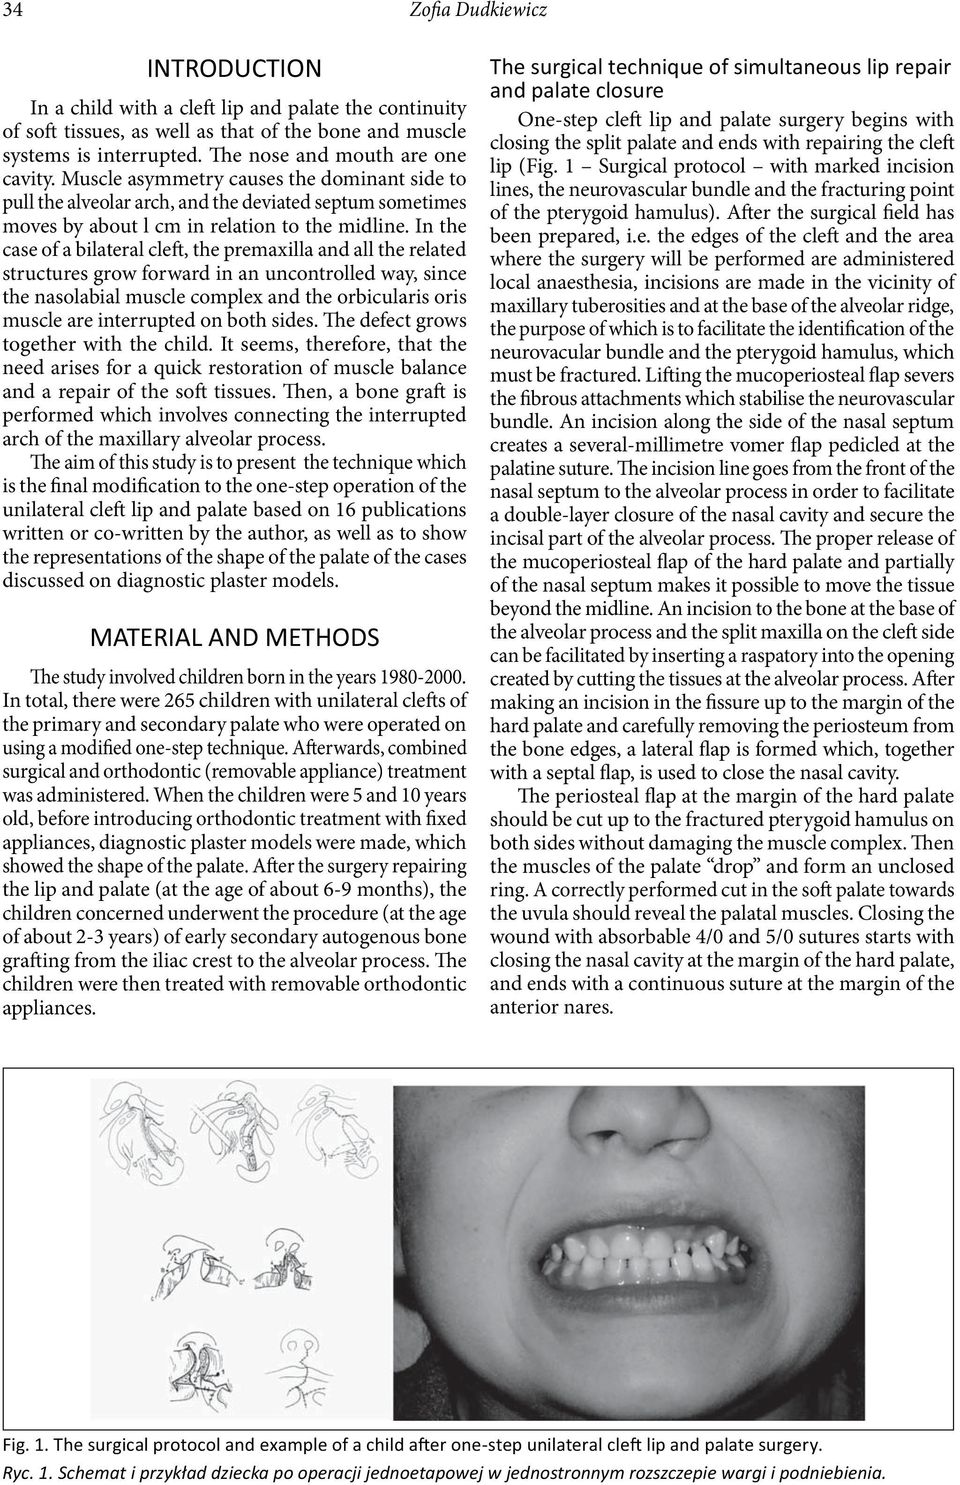 In the case of a bilateral cleft, the premaxilla and all the related structures grow forward in an uncontrolled way, since the nasolabial muscle complex and the orbicularis oris muscle are